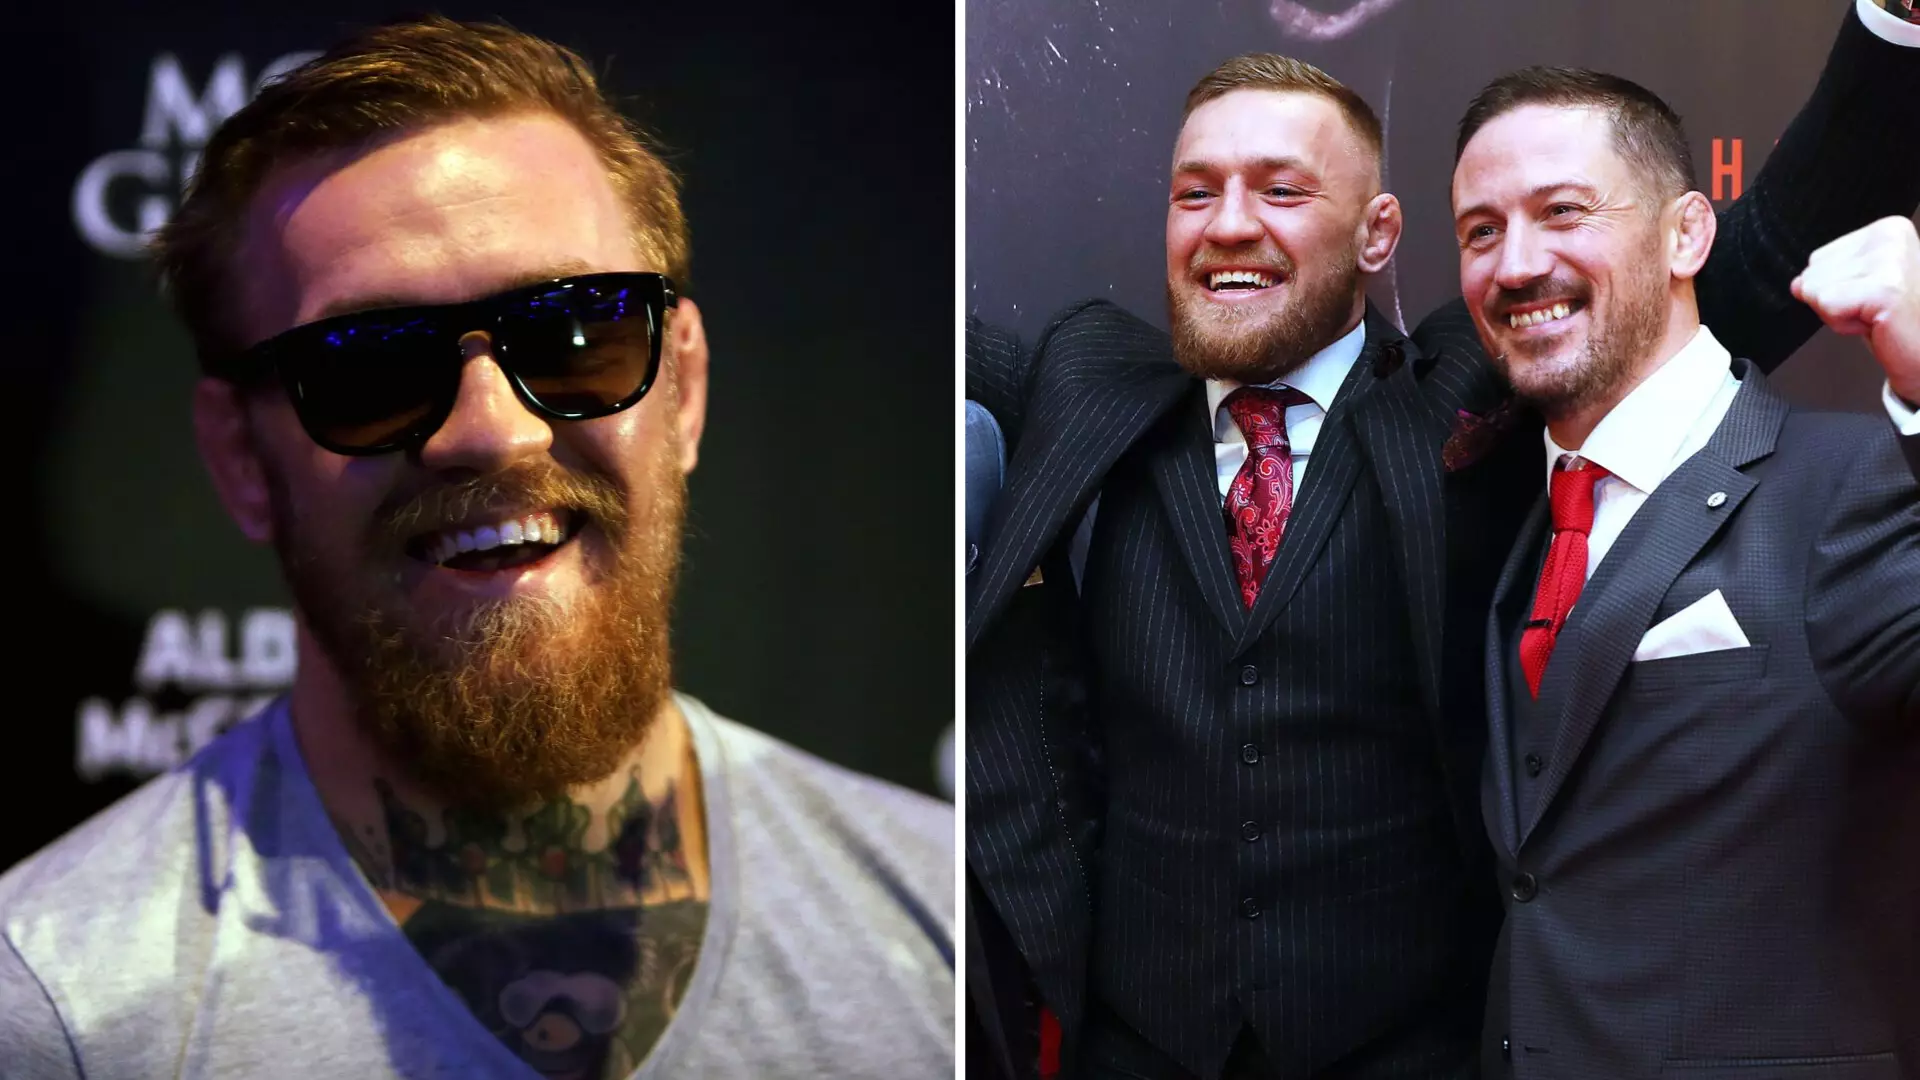 Conor McGregor’s Coach Wants Him To Fight Frankie Edgar In UFC Return Bout